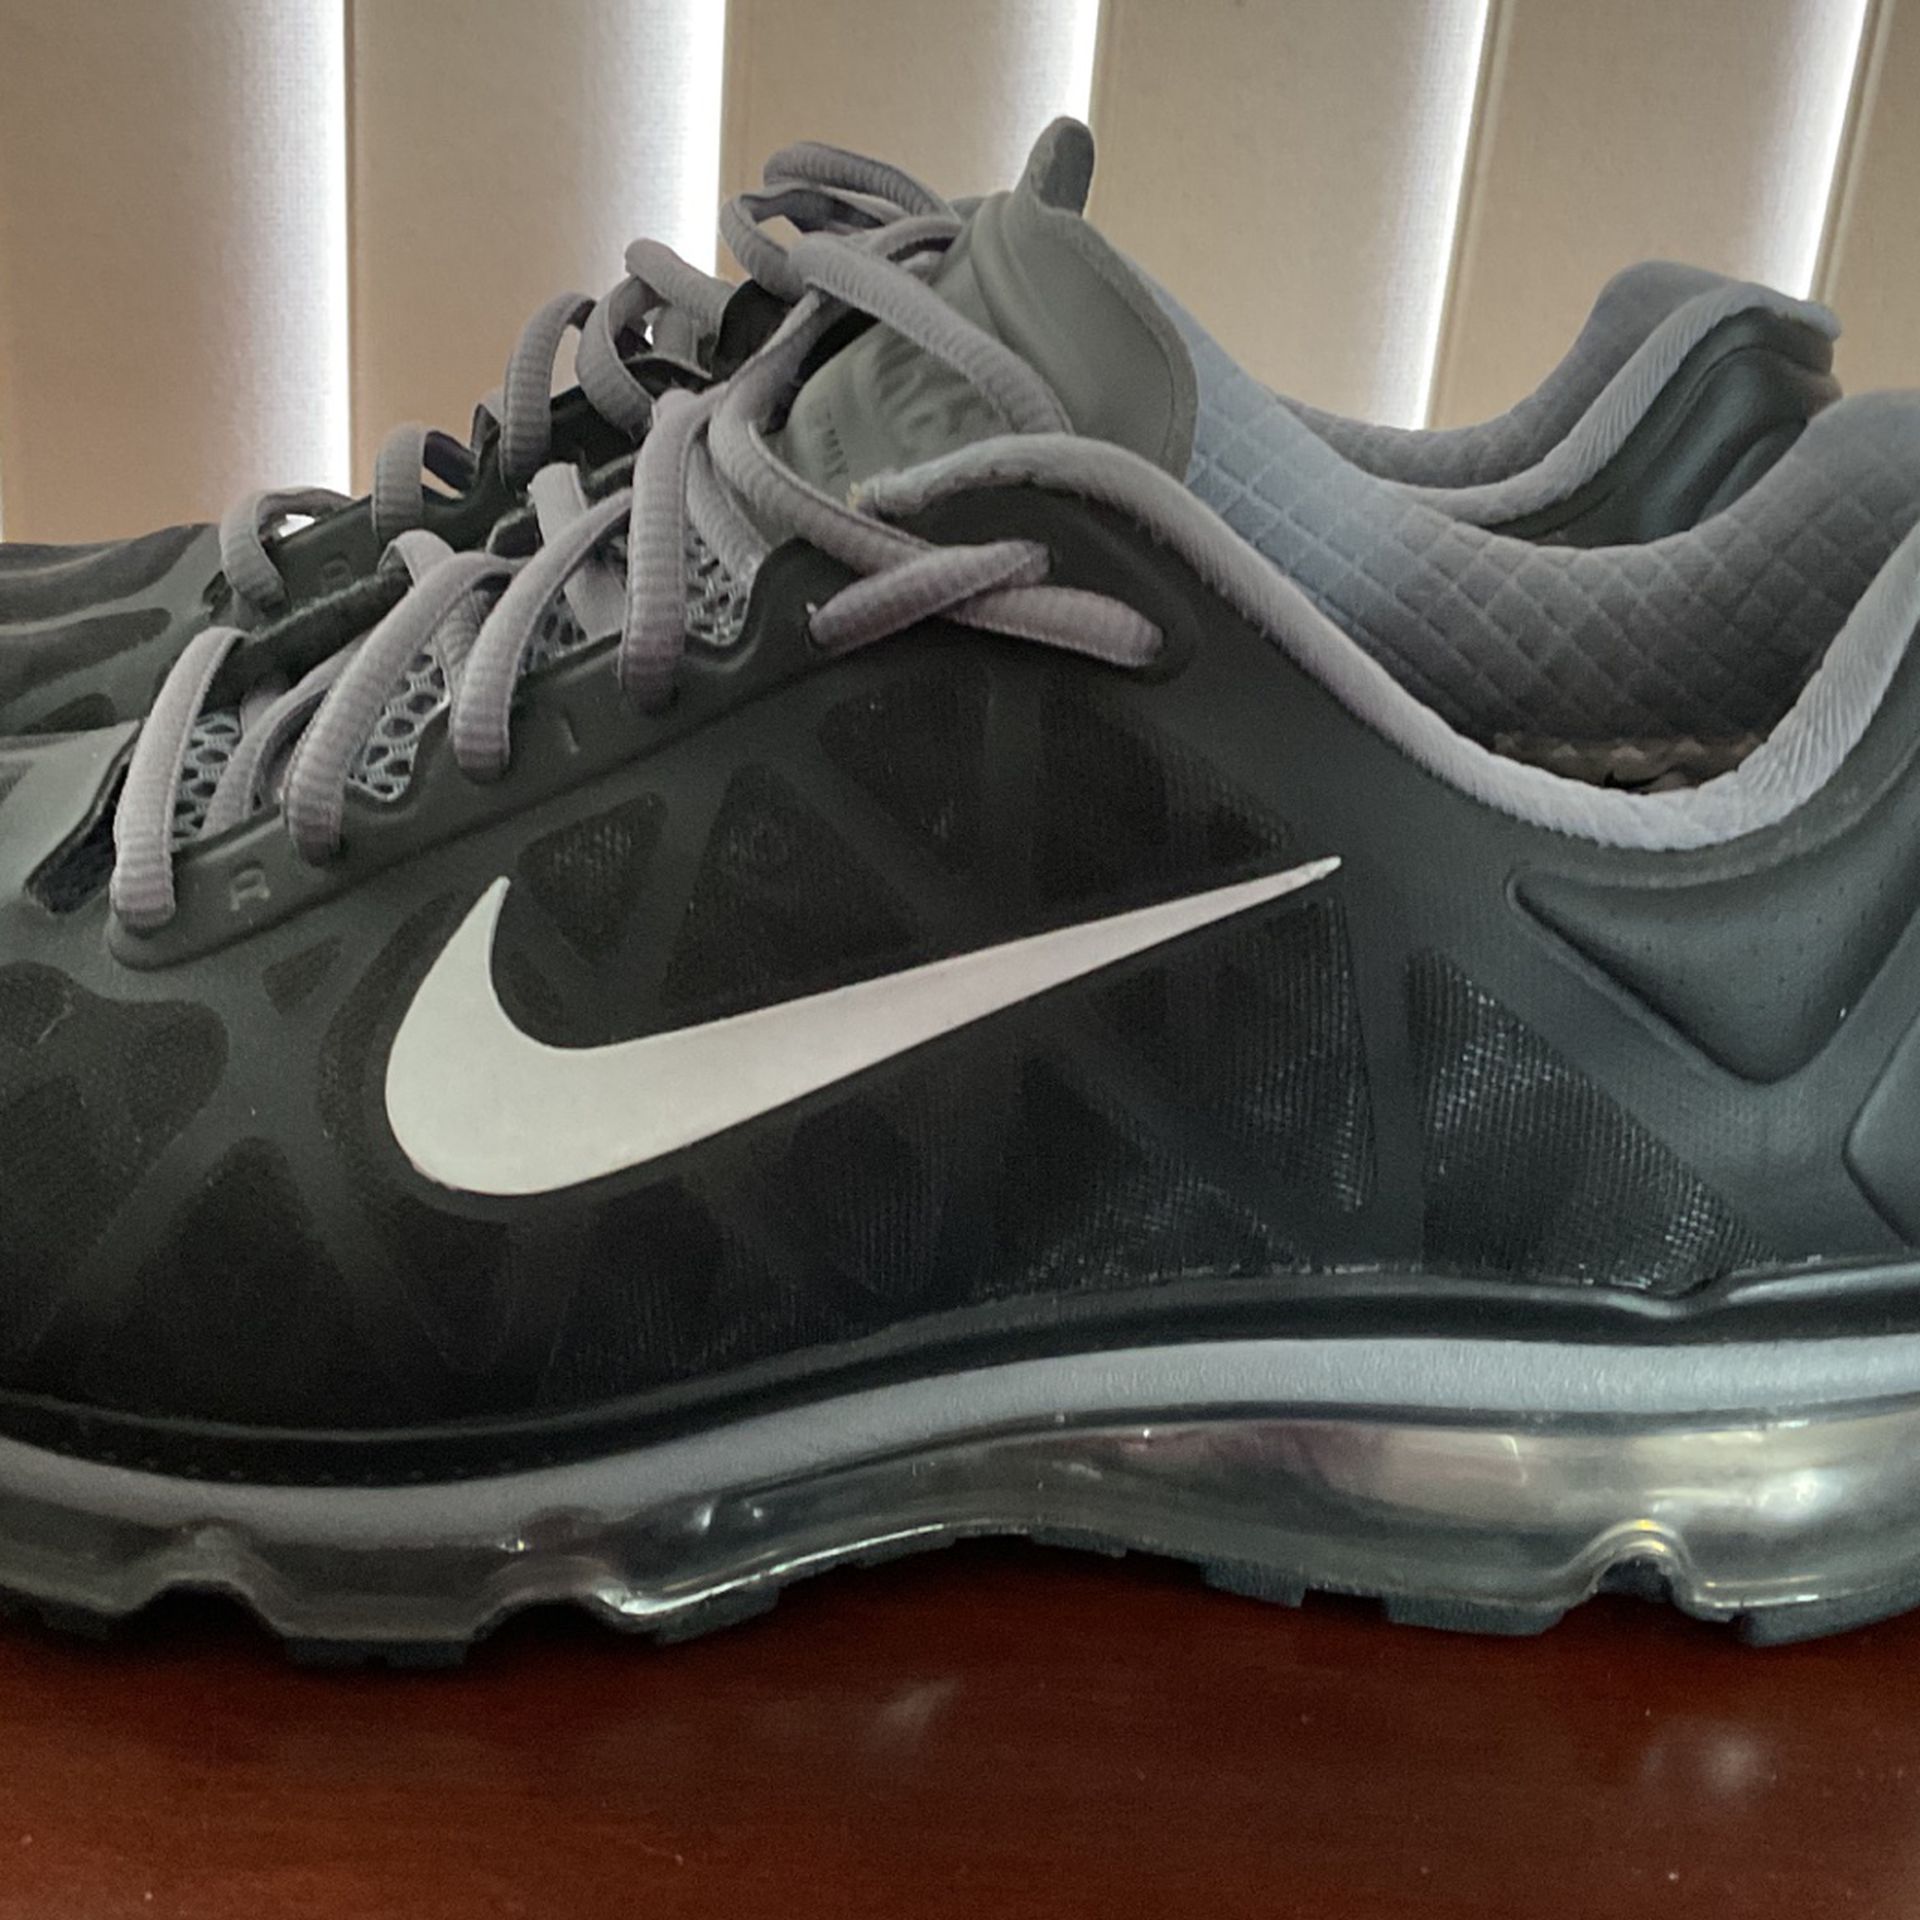 Nike Air Max 2011 Size 11.5 Black 429889-010 Fitsole 2 Sale in Westmont, IL OfferUp